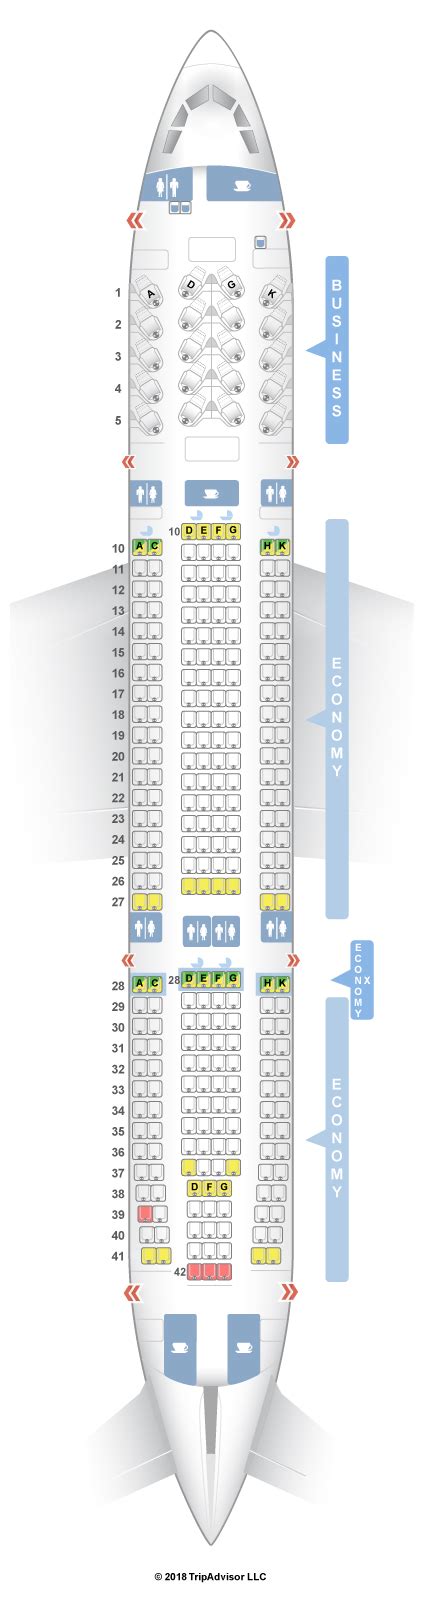 Delta Airlines Airbus A330 200 Seating Chart